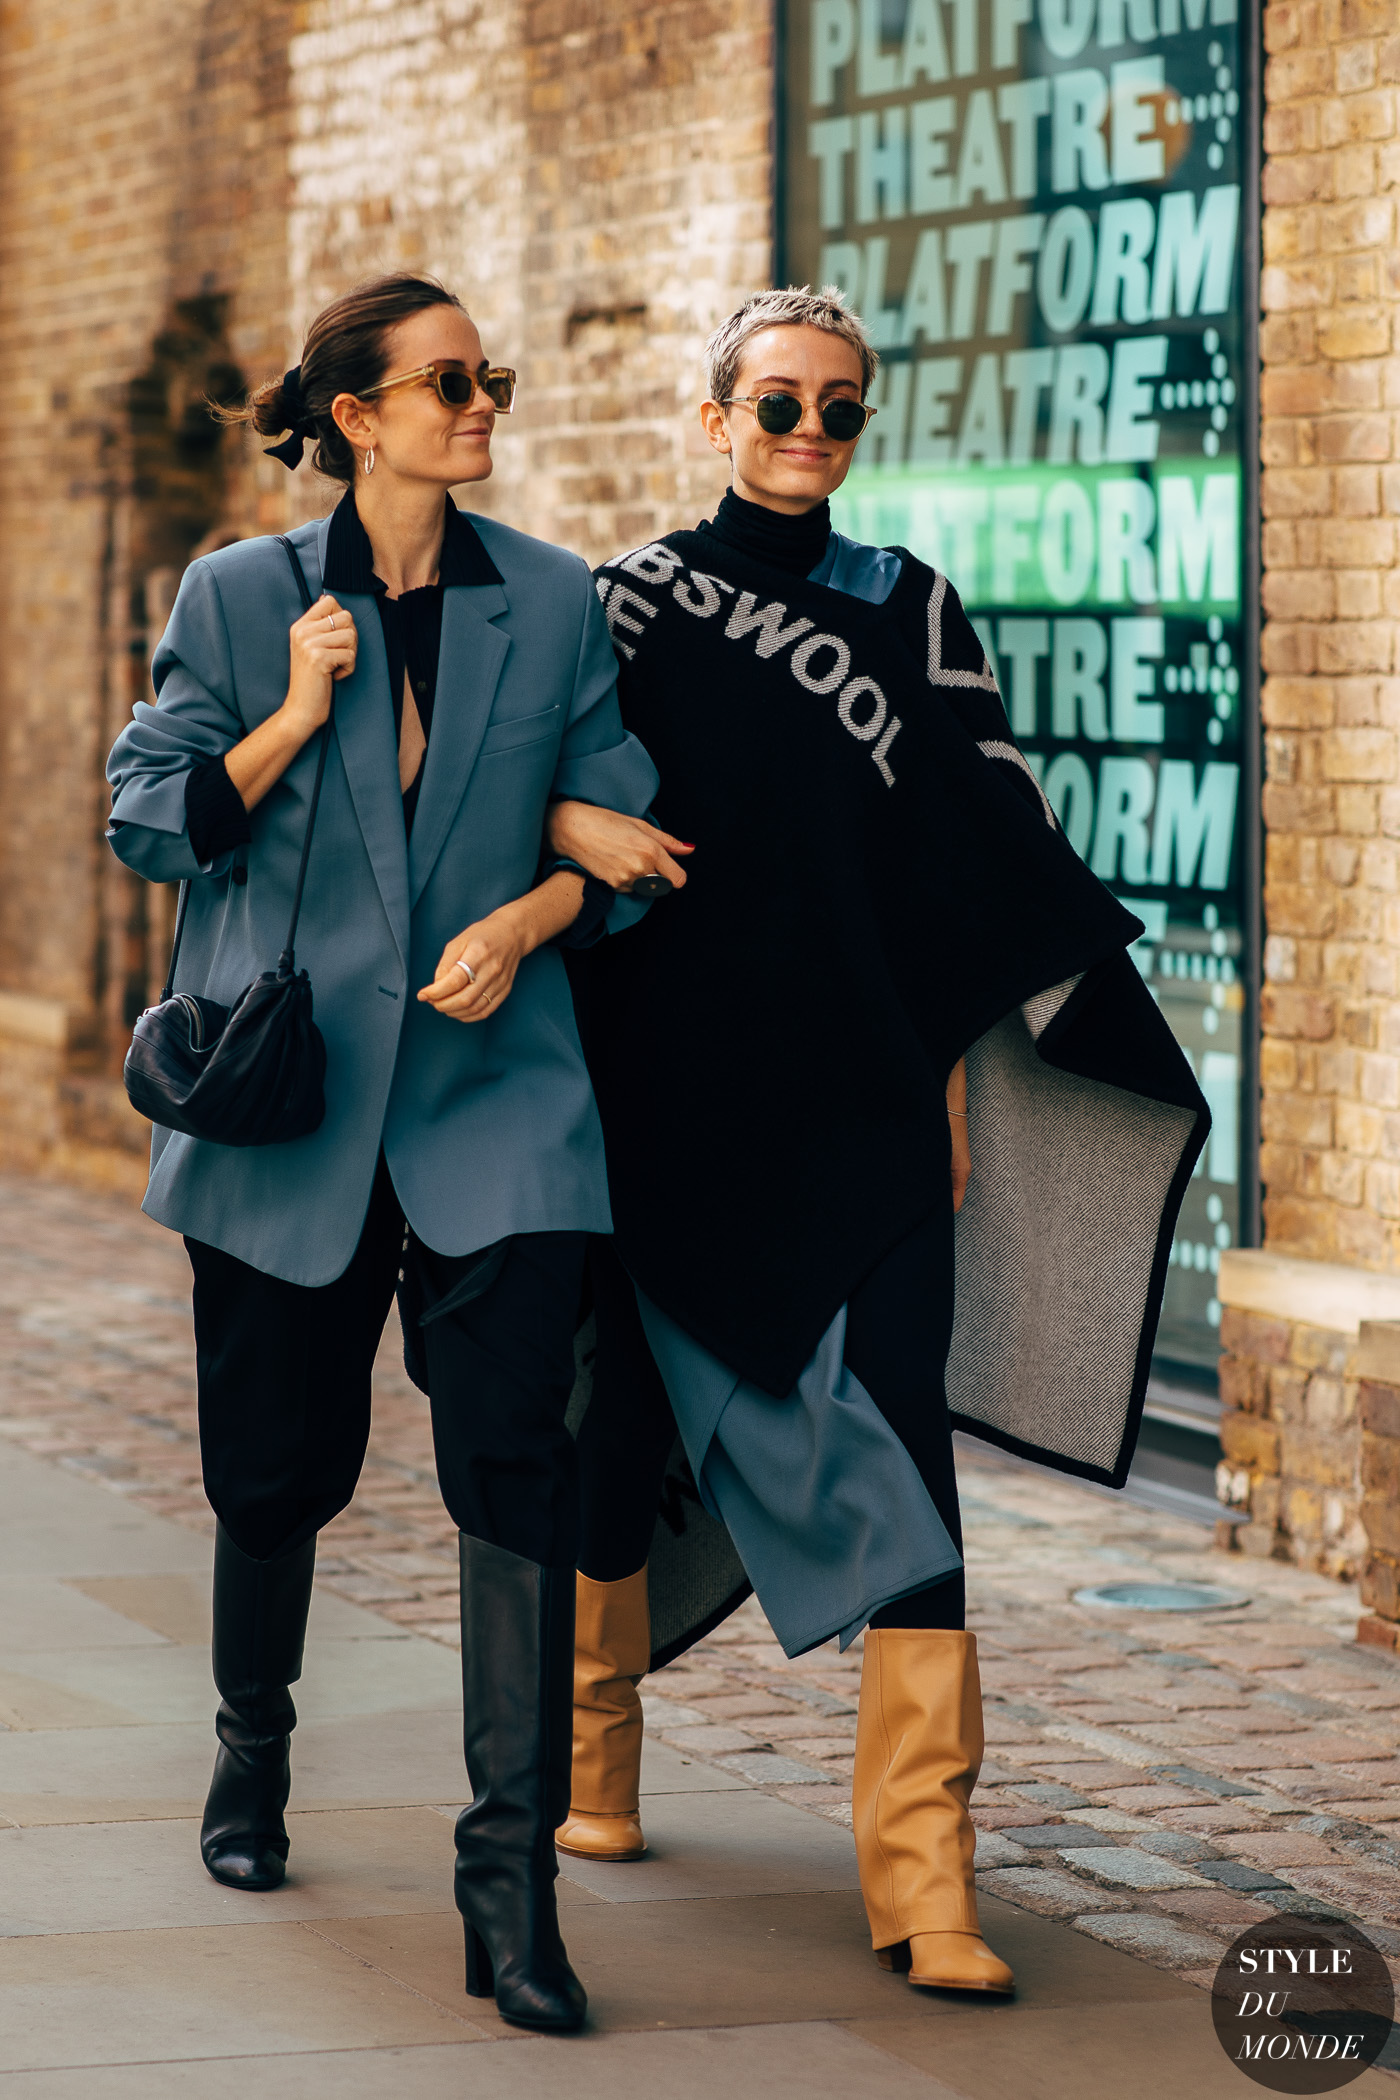 London SS19 day2 by STYLEDUMONDE Street Style Fashion Photography20180915_48A3909